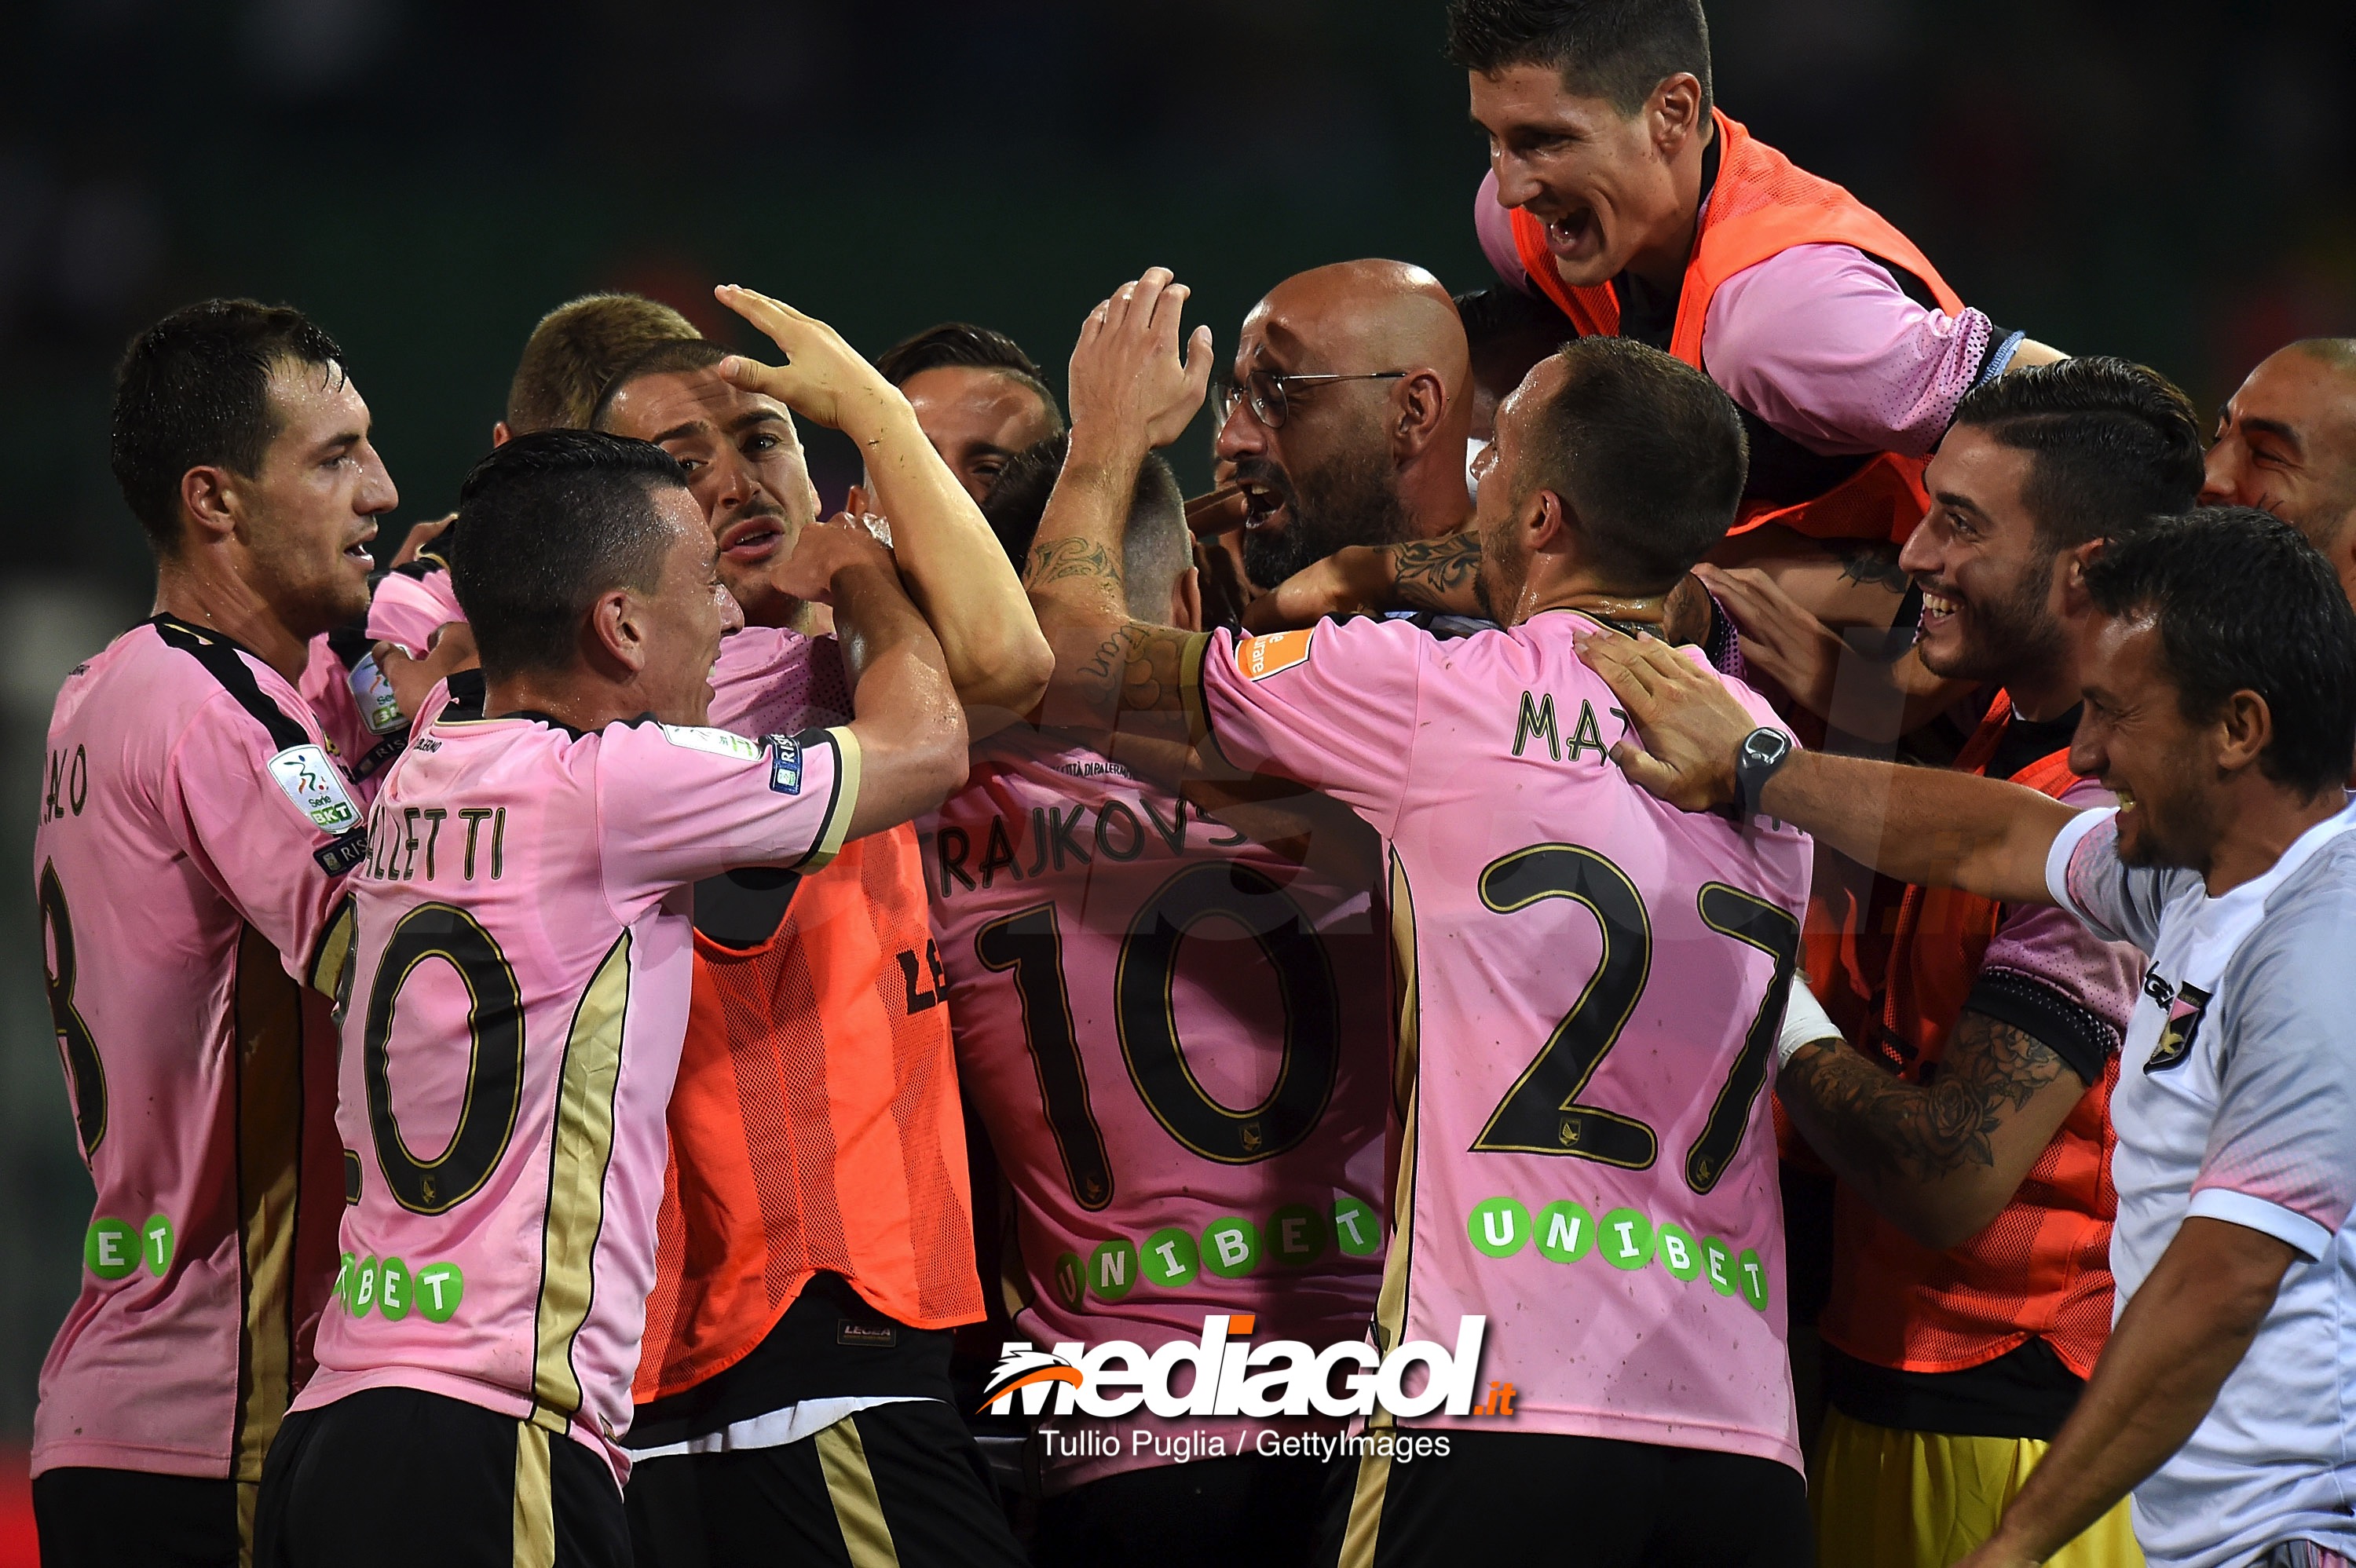 PALERMO, ITALY - AUGUST 31:  Aleksandar Trajkovski of Palermo celebrates with teammates after scoring the opening goal during the Serie B match between US Citta' di Palermo and US Cremonese at Stadio Renzo Barbera on August 31, 2018 in Palermo, Italy.  (Photo by Tullio M. Puglia/Getty Images)